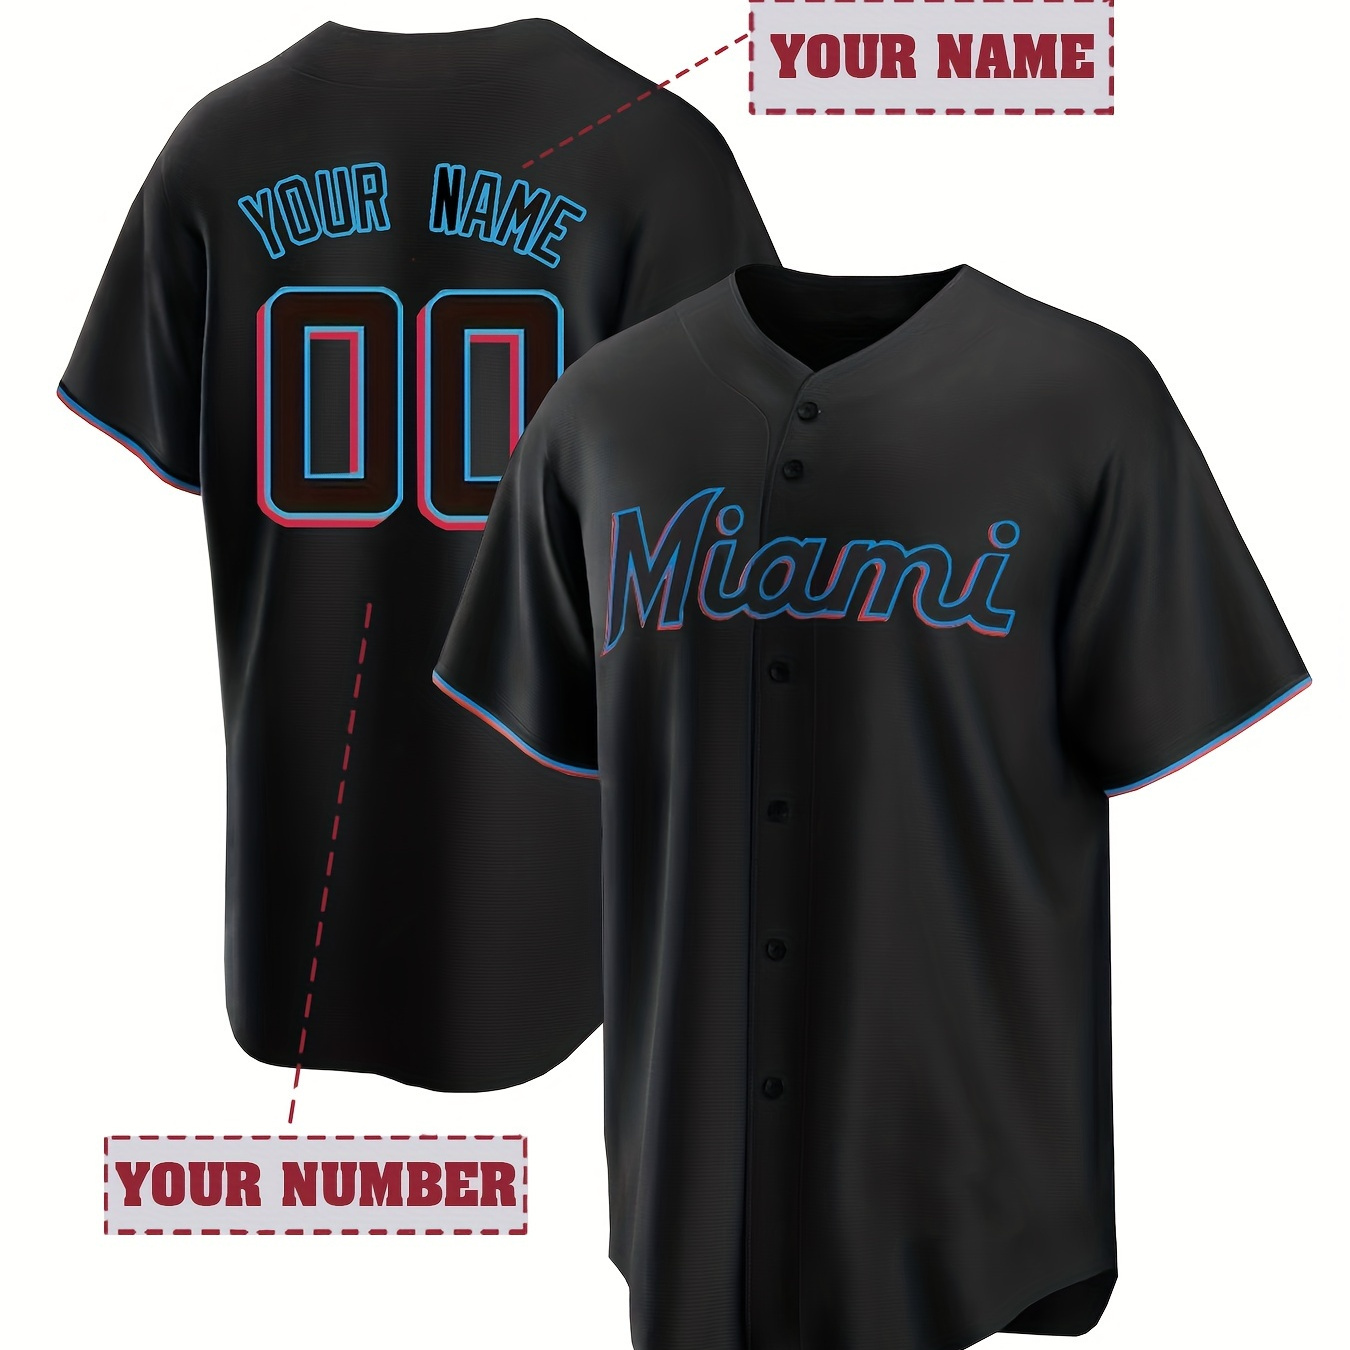 

Customized Men's V-neck Baseball Jersey With Personalized Name & Number, Short Sleeve Breathable Embroidery Sports Team Training Shirt